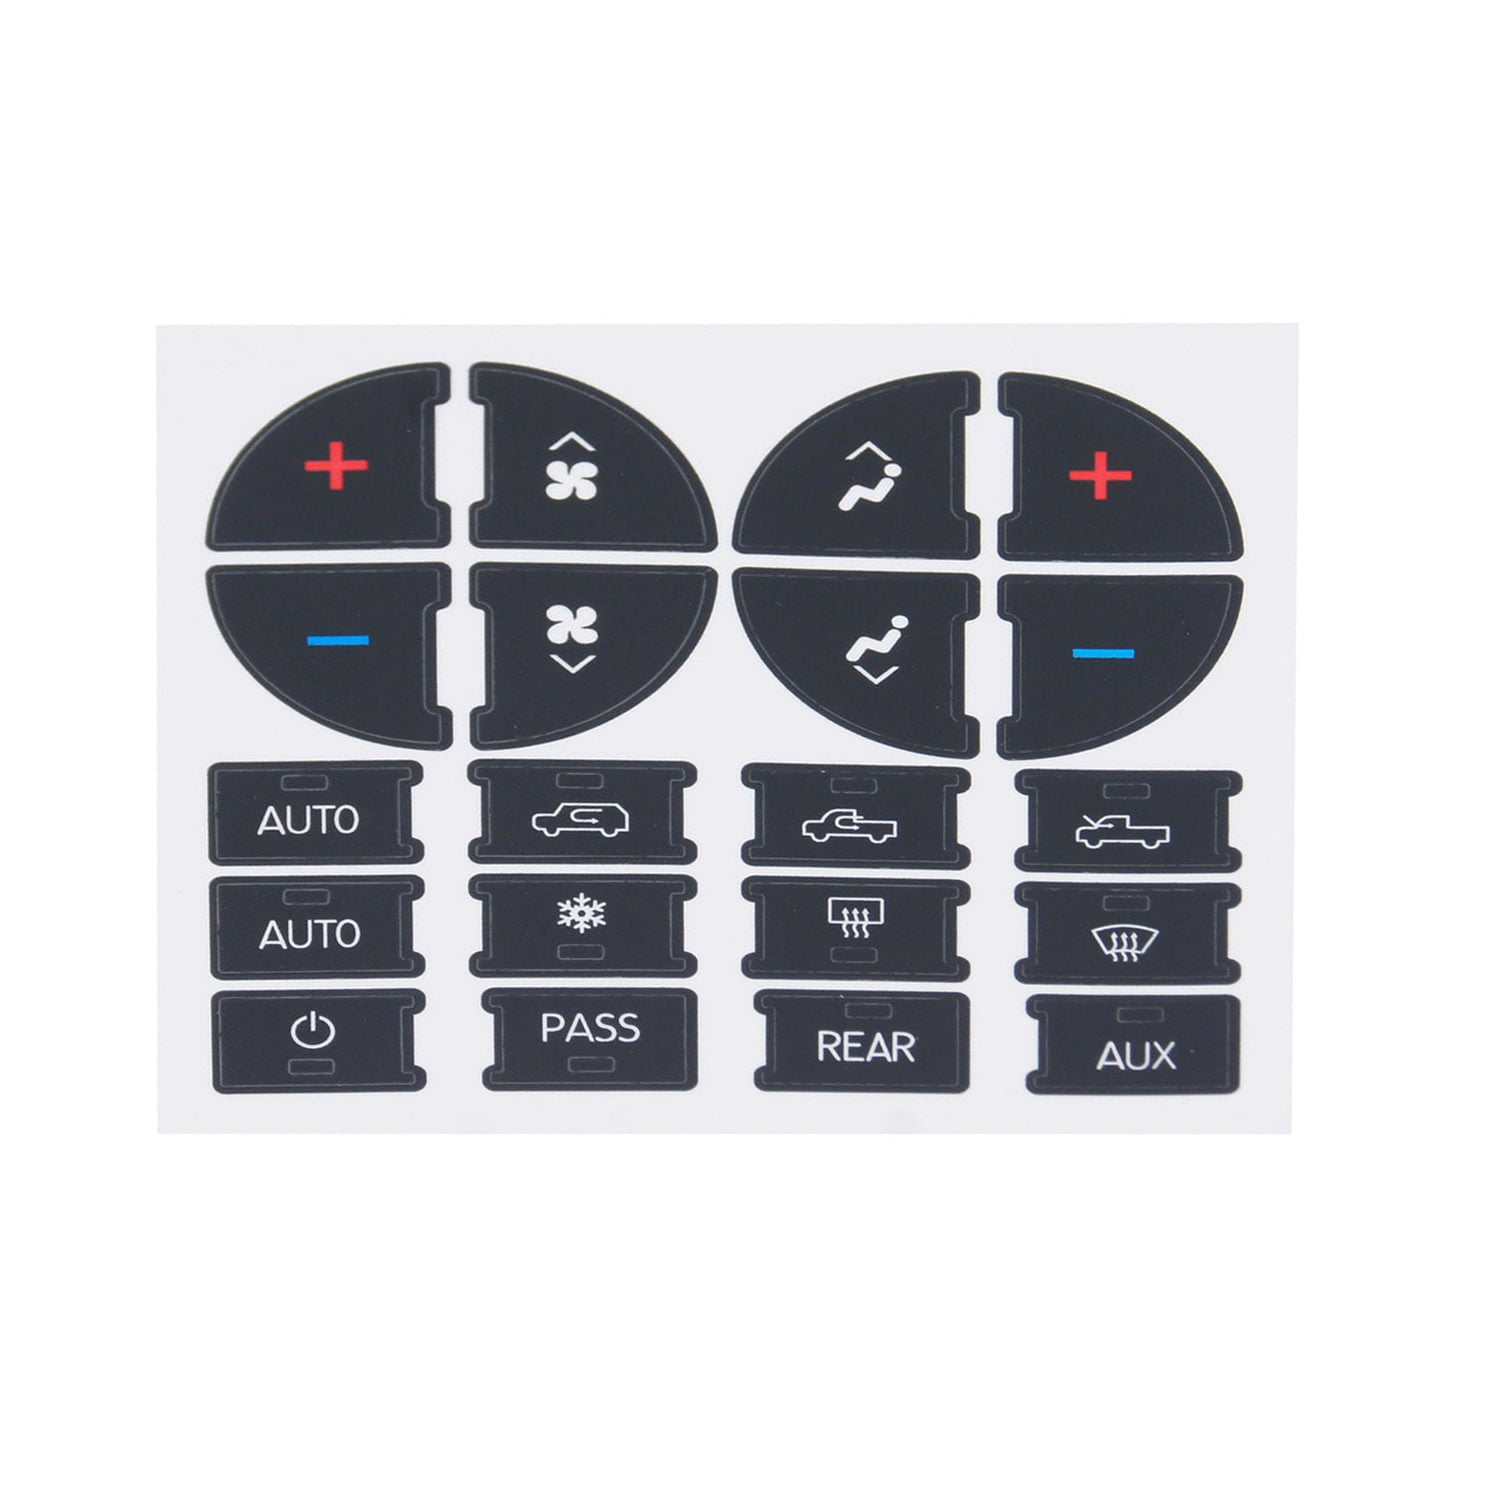 AC Panel Decals & Radio Button Repair Decal Set KKmoon AC Dash Button Sticker Repair Kit Replacement for Chevrolet GMC Tahoe 2007-2015 